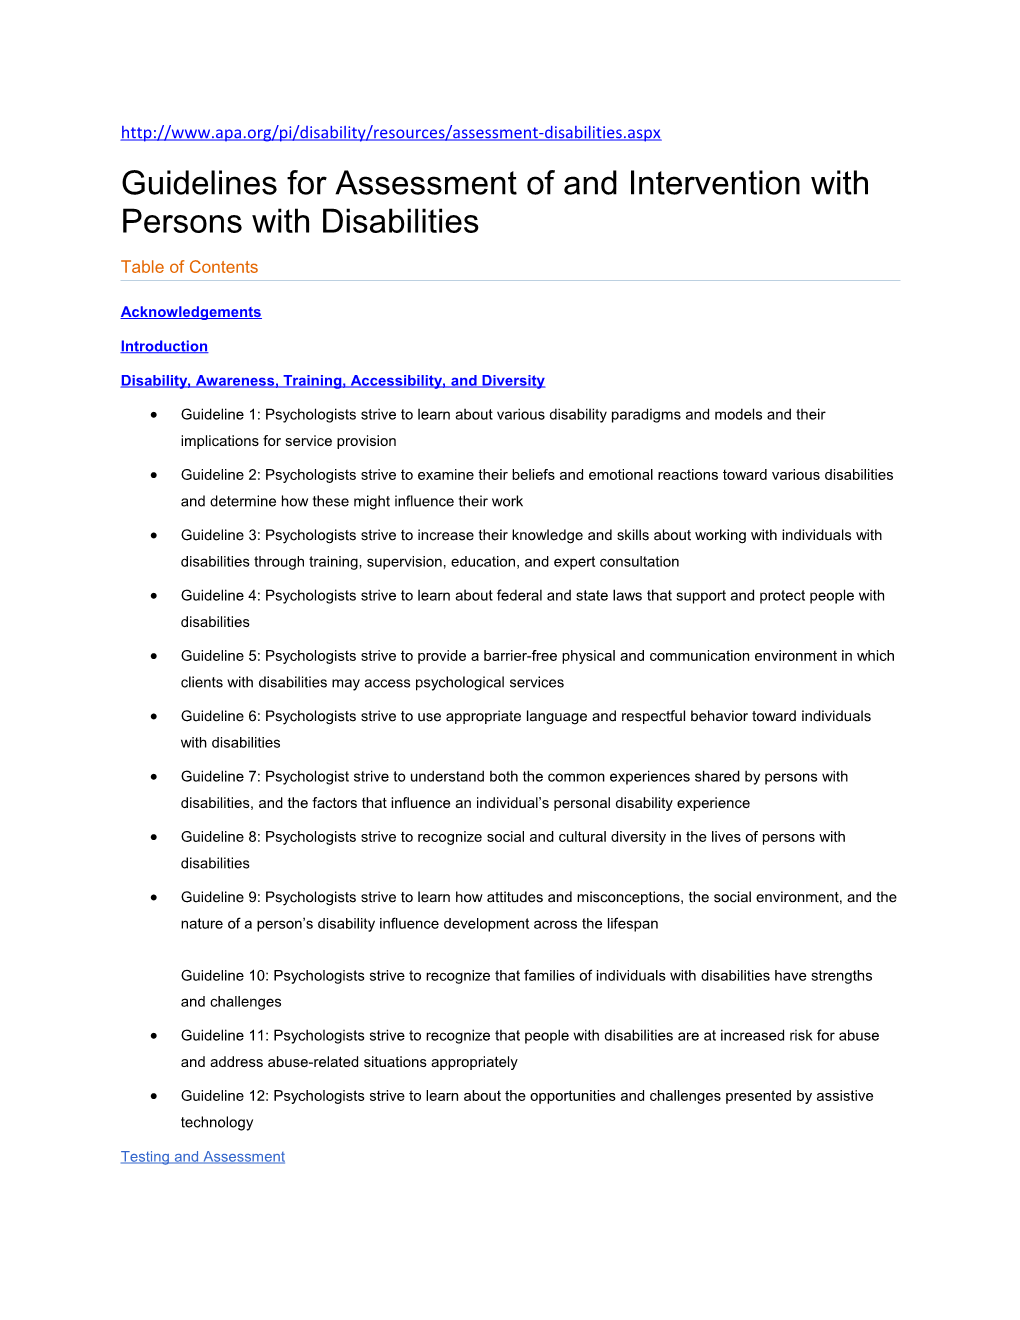 Guidelines for Assessment of and Intervention with Persons with Disabilities